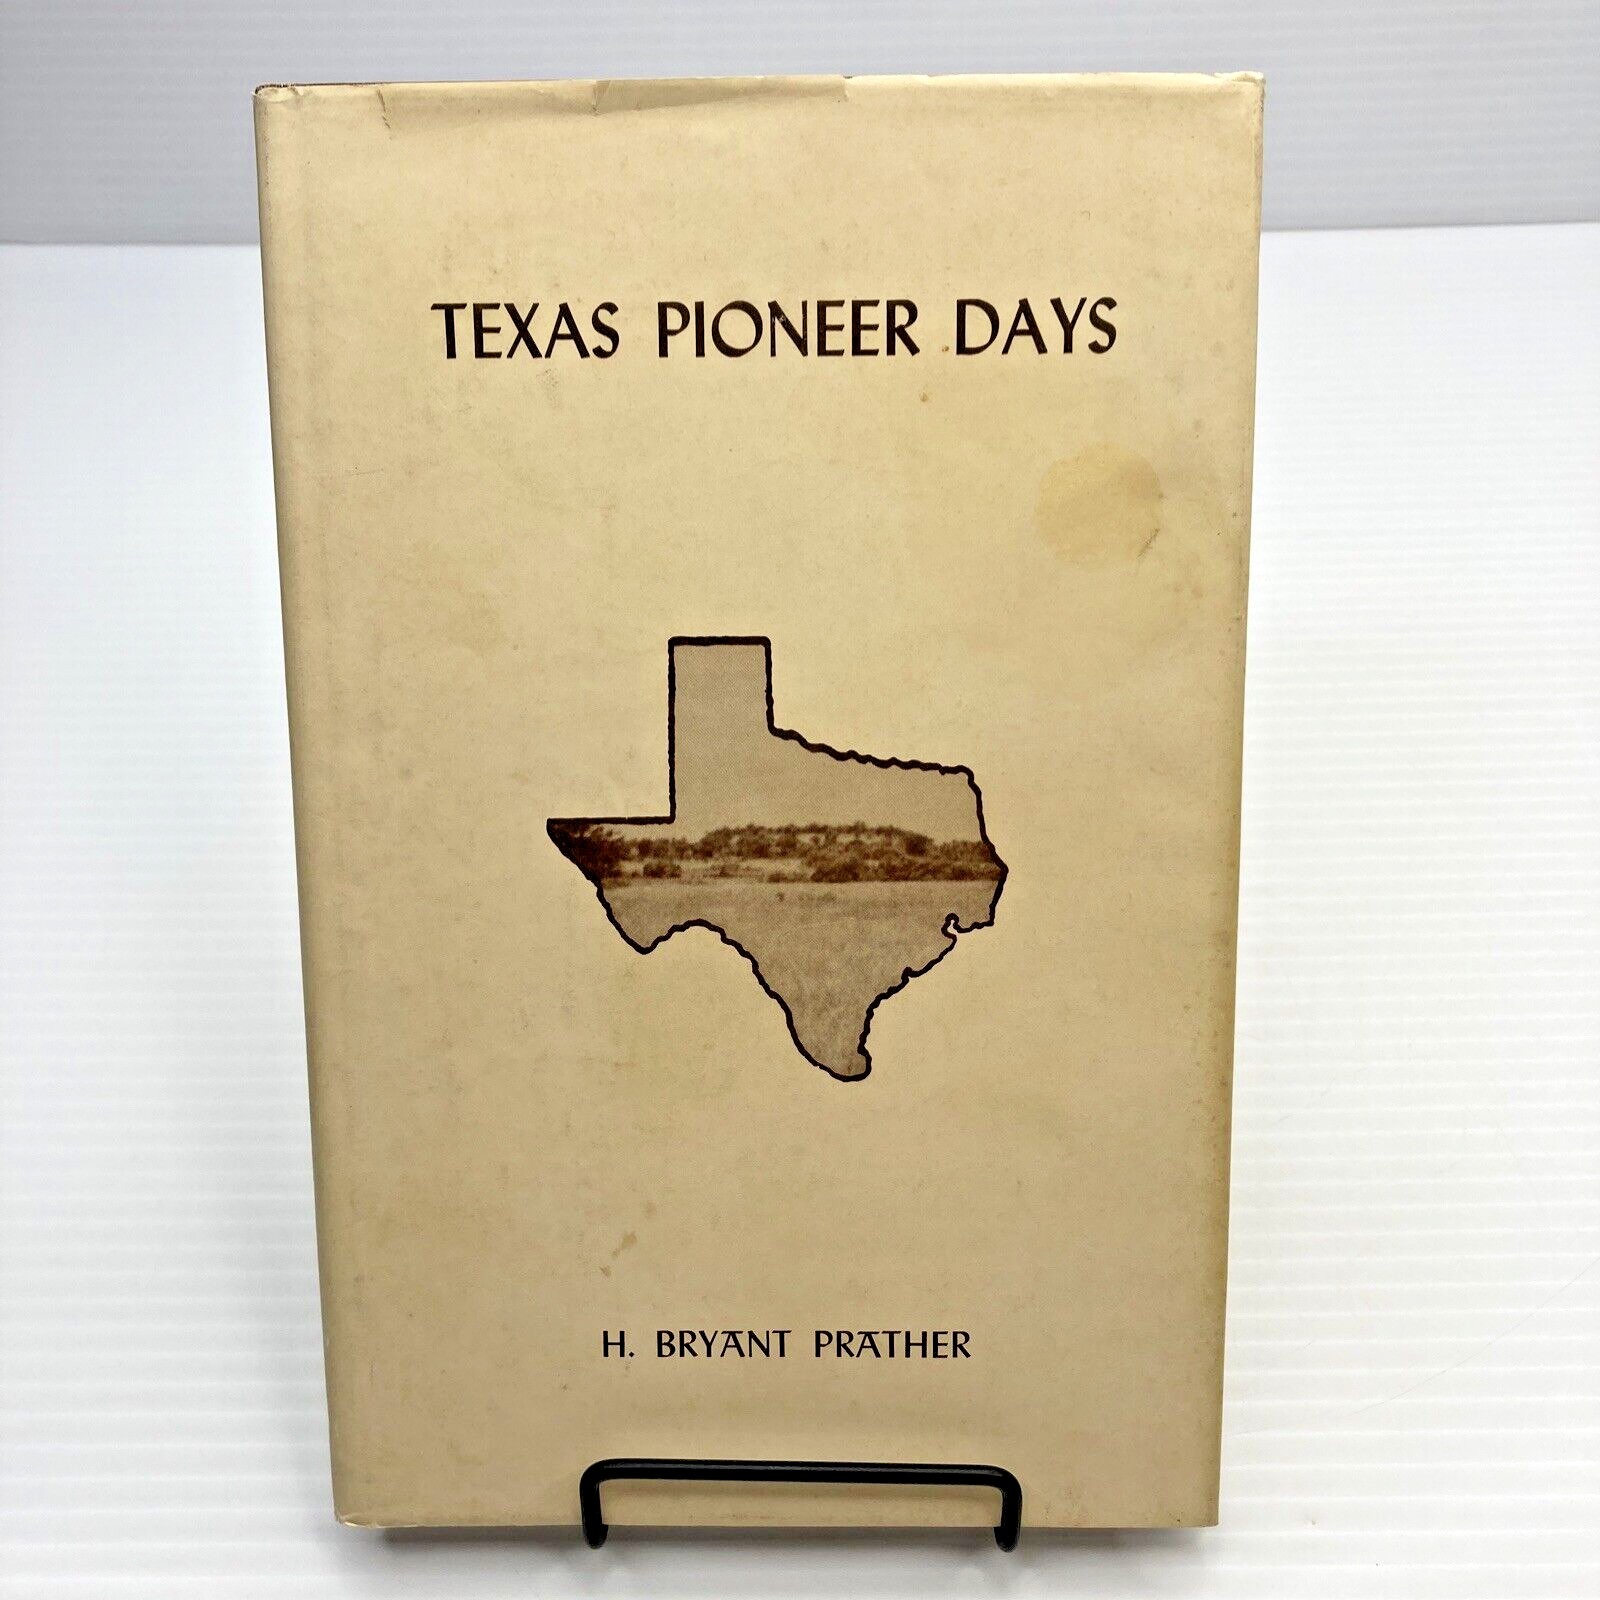 Texas Pioneer Days Signed True Stories of Old West Centered Around Indian Mound